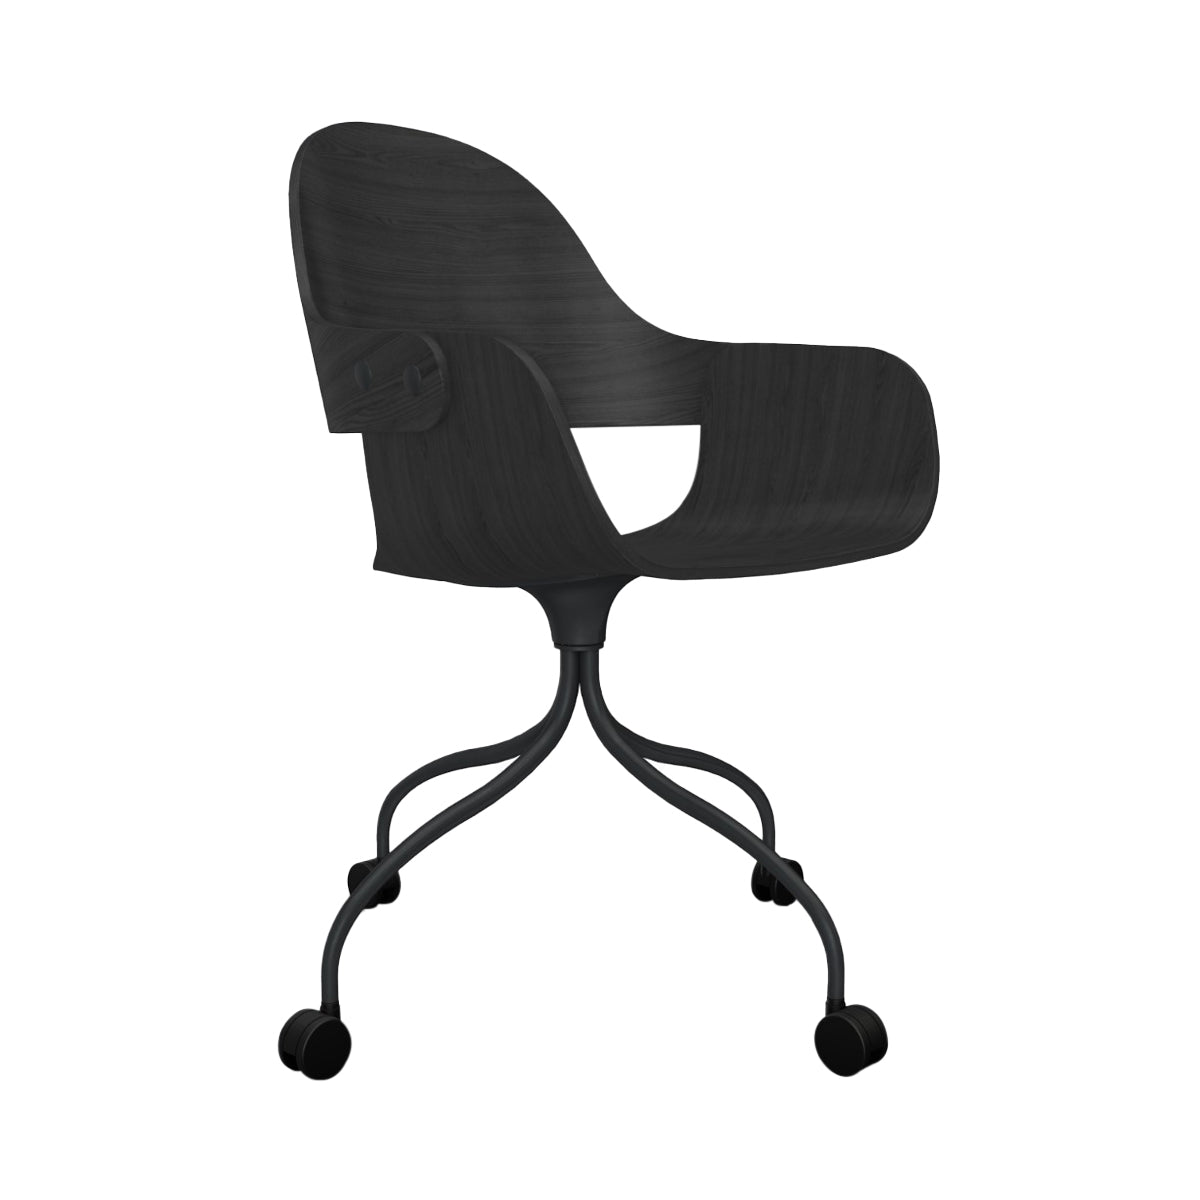 Showtime Nude Chair with Wheel: Ash Stained Black + Anthracite Grey